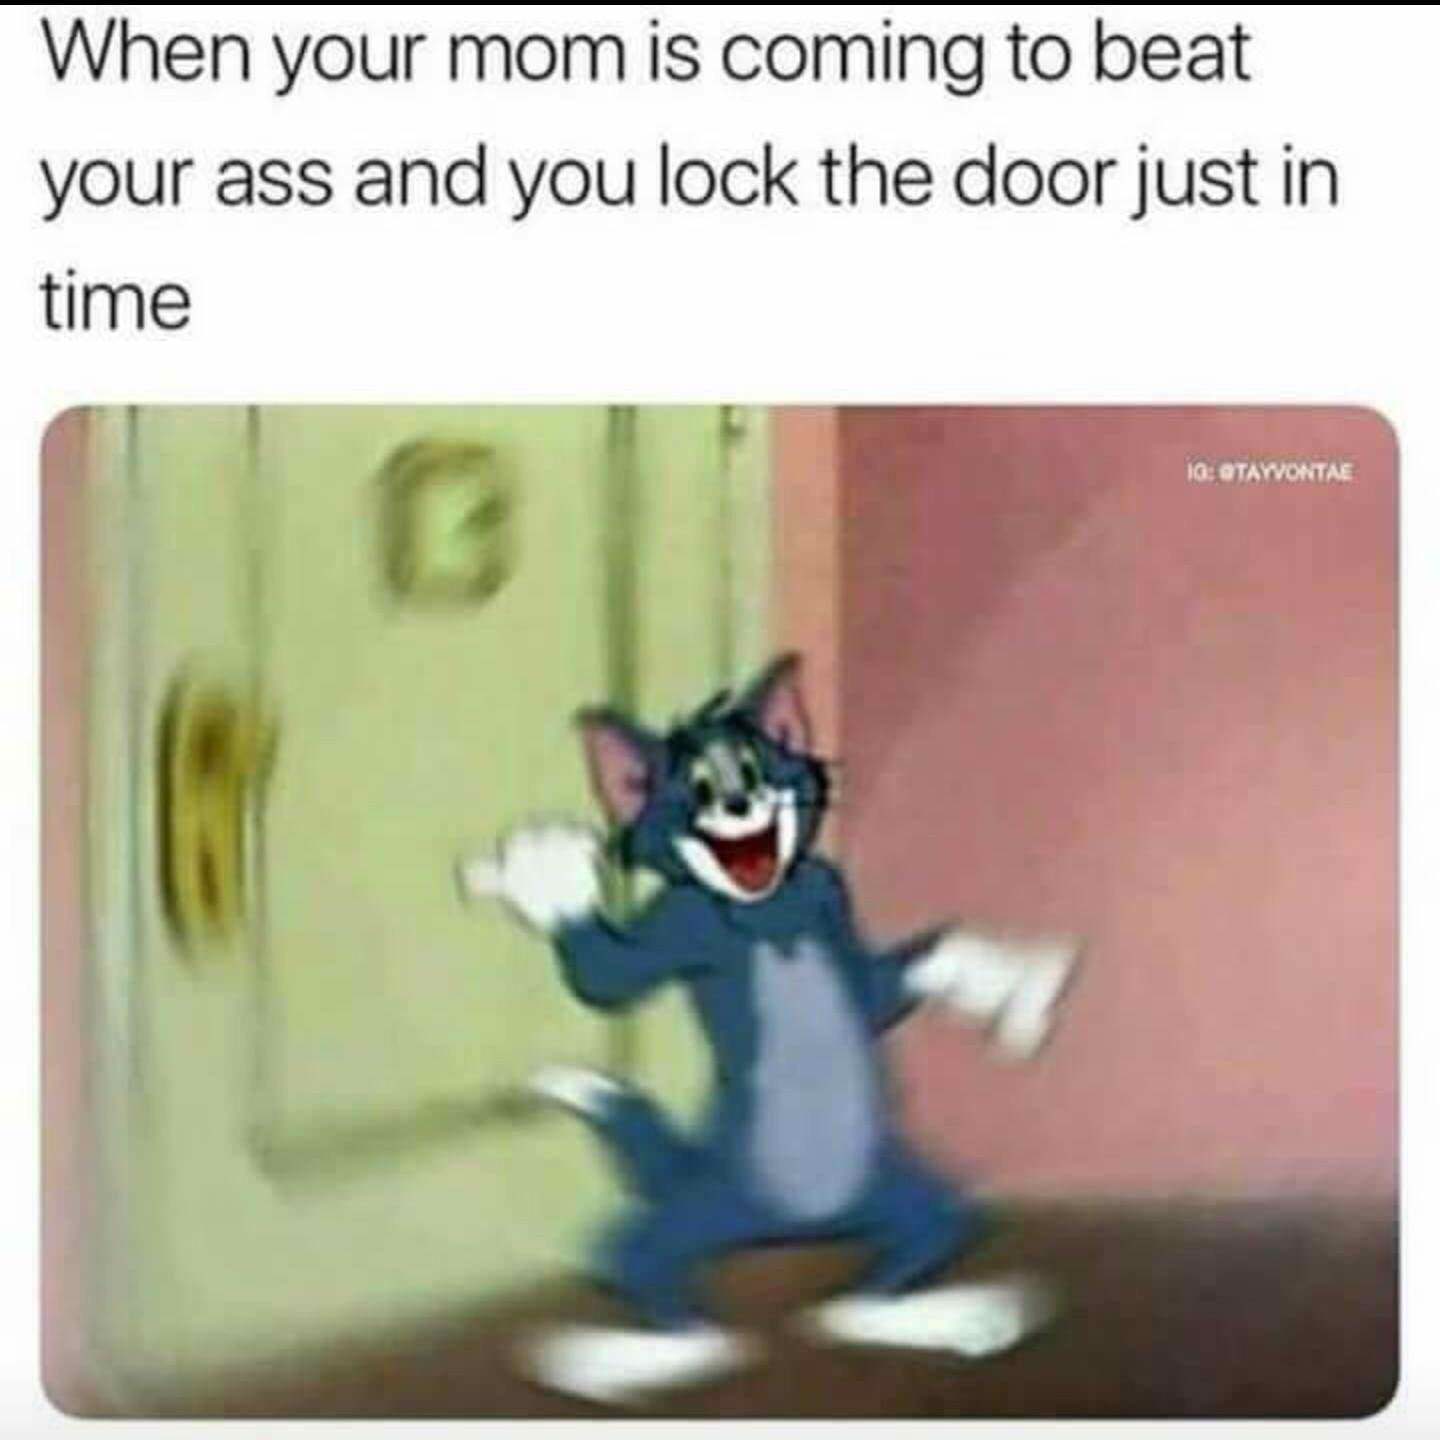 your mom is coming to beat your ass - When your mom is coming to beat your ass and you lock the door just in time Ig